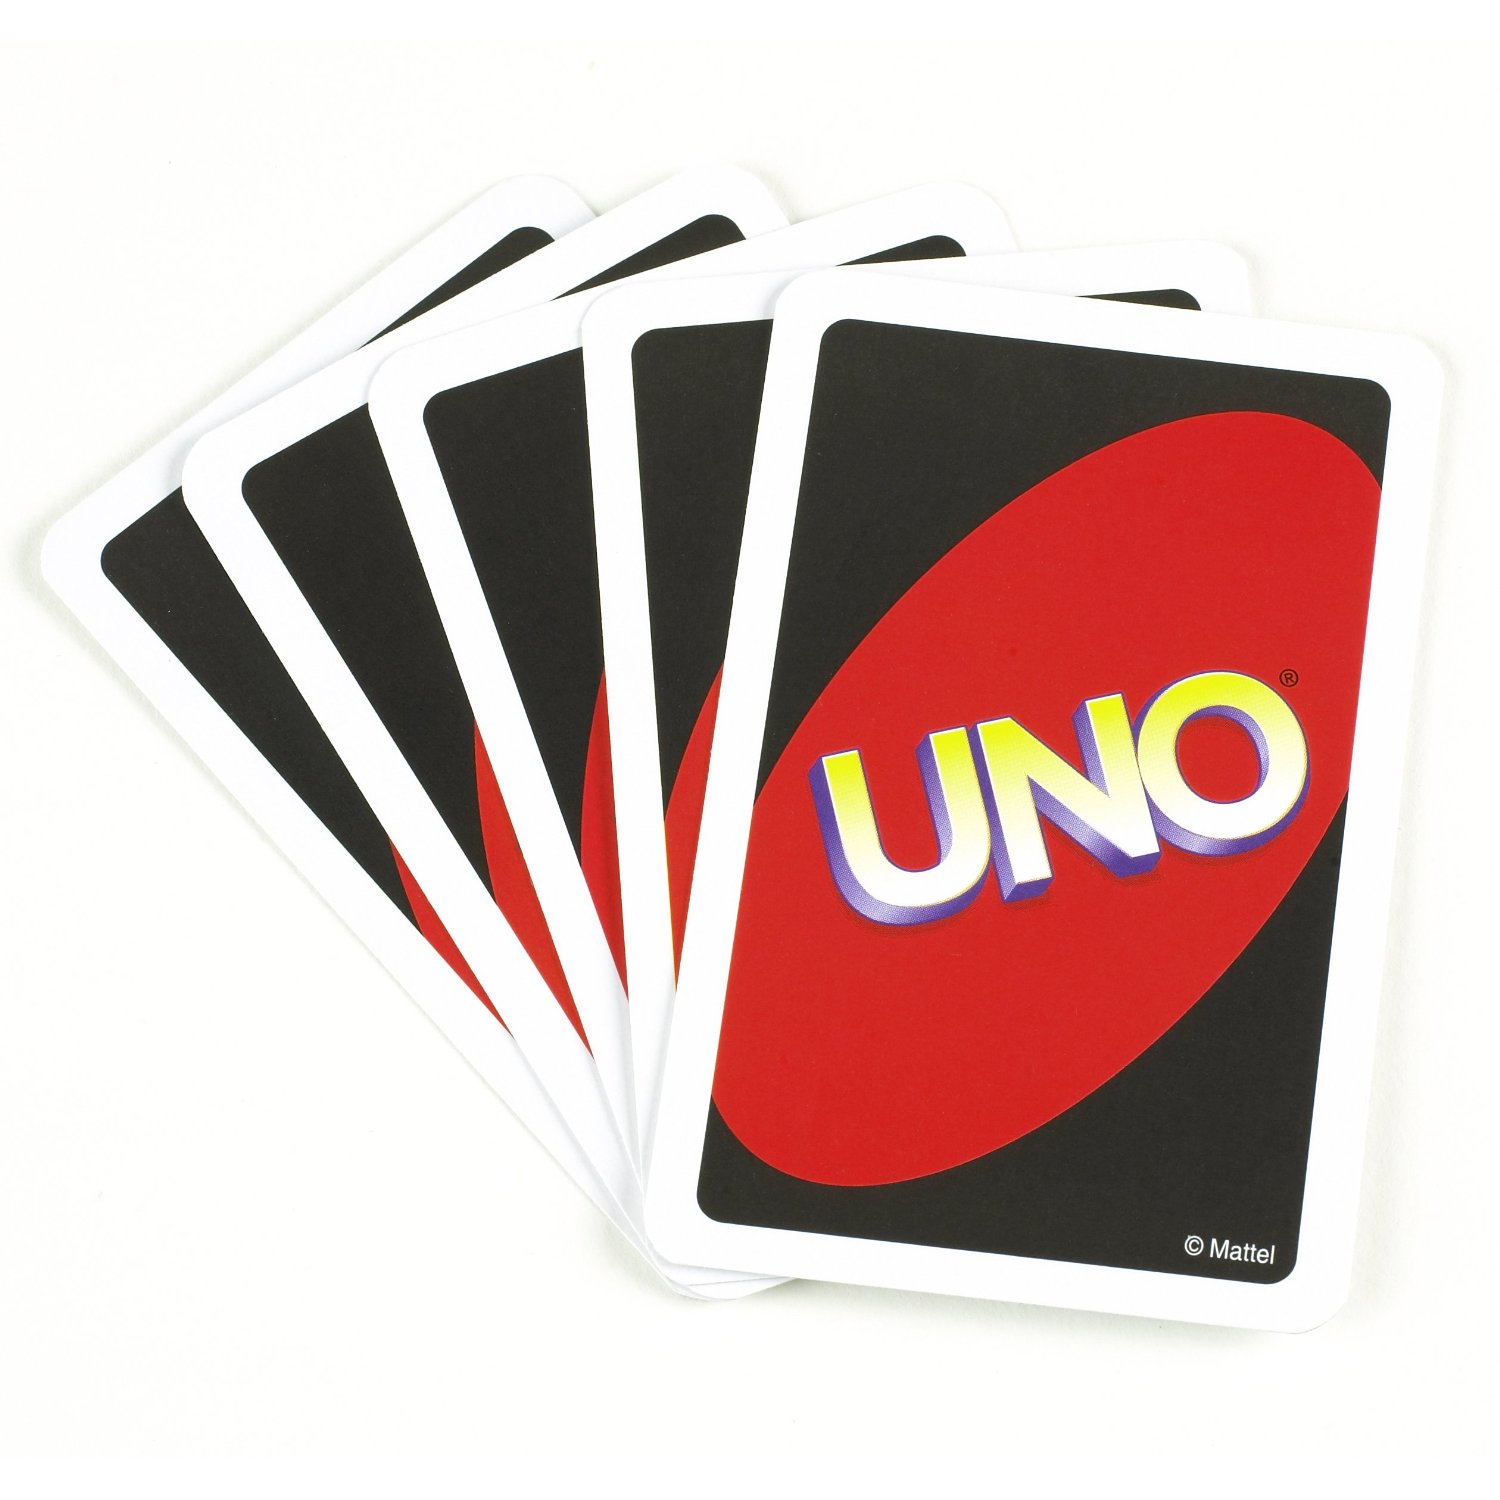 612 Uno Logo Images, Stock Photos, 3D objects, & Vectors | Shutterstock